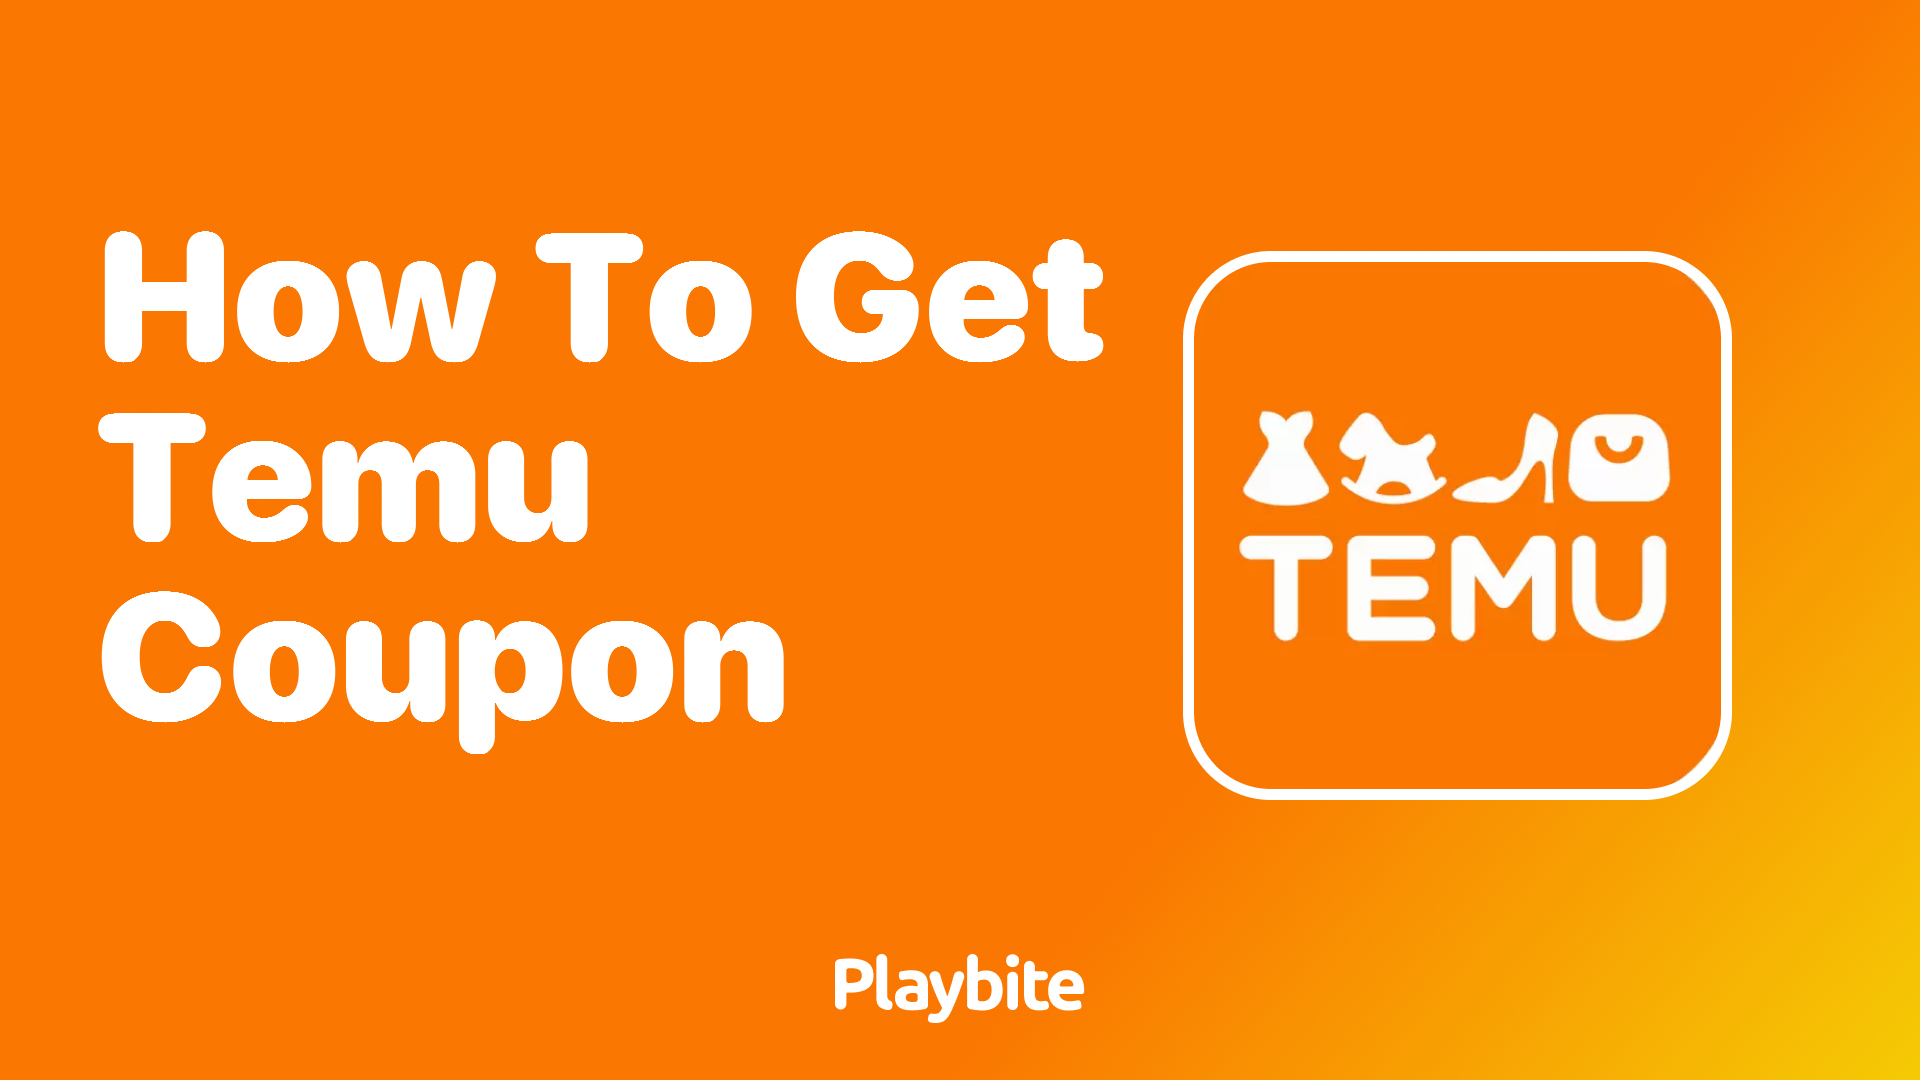 How to Get a Temu Coupon: A Simple Guide